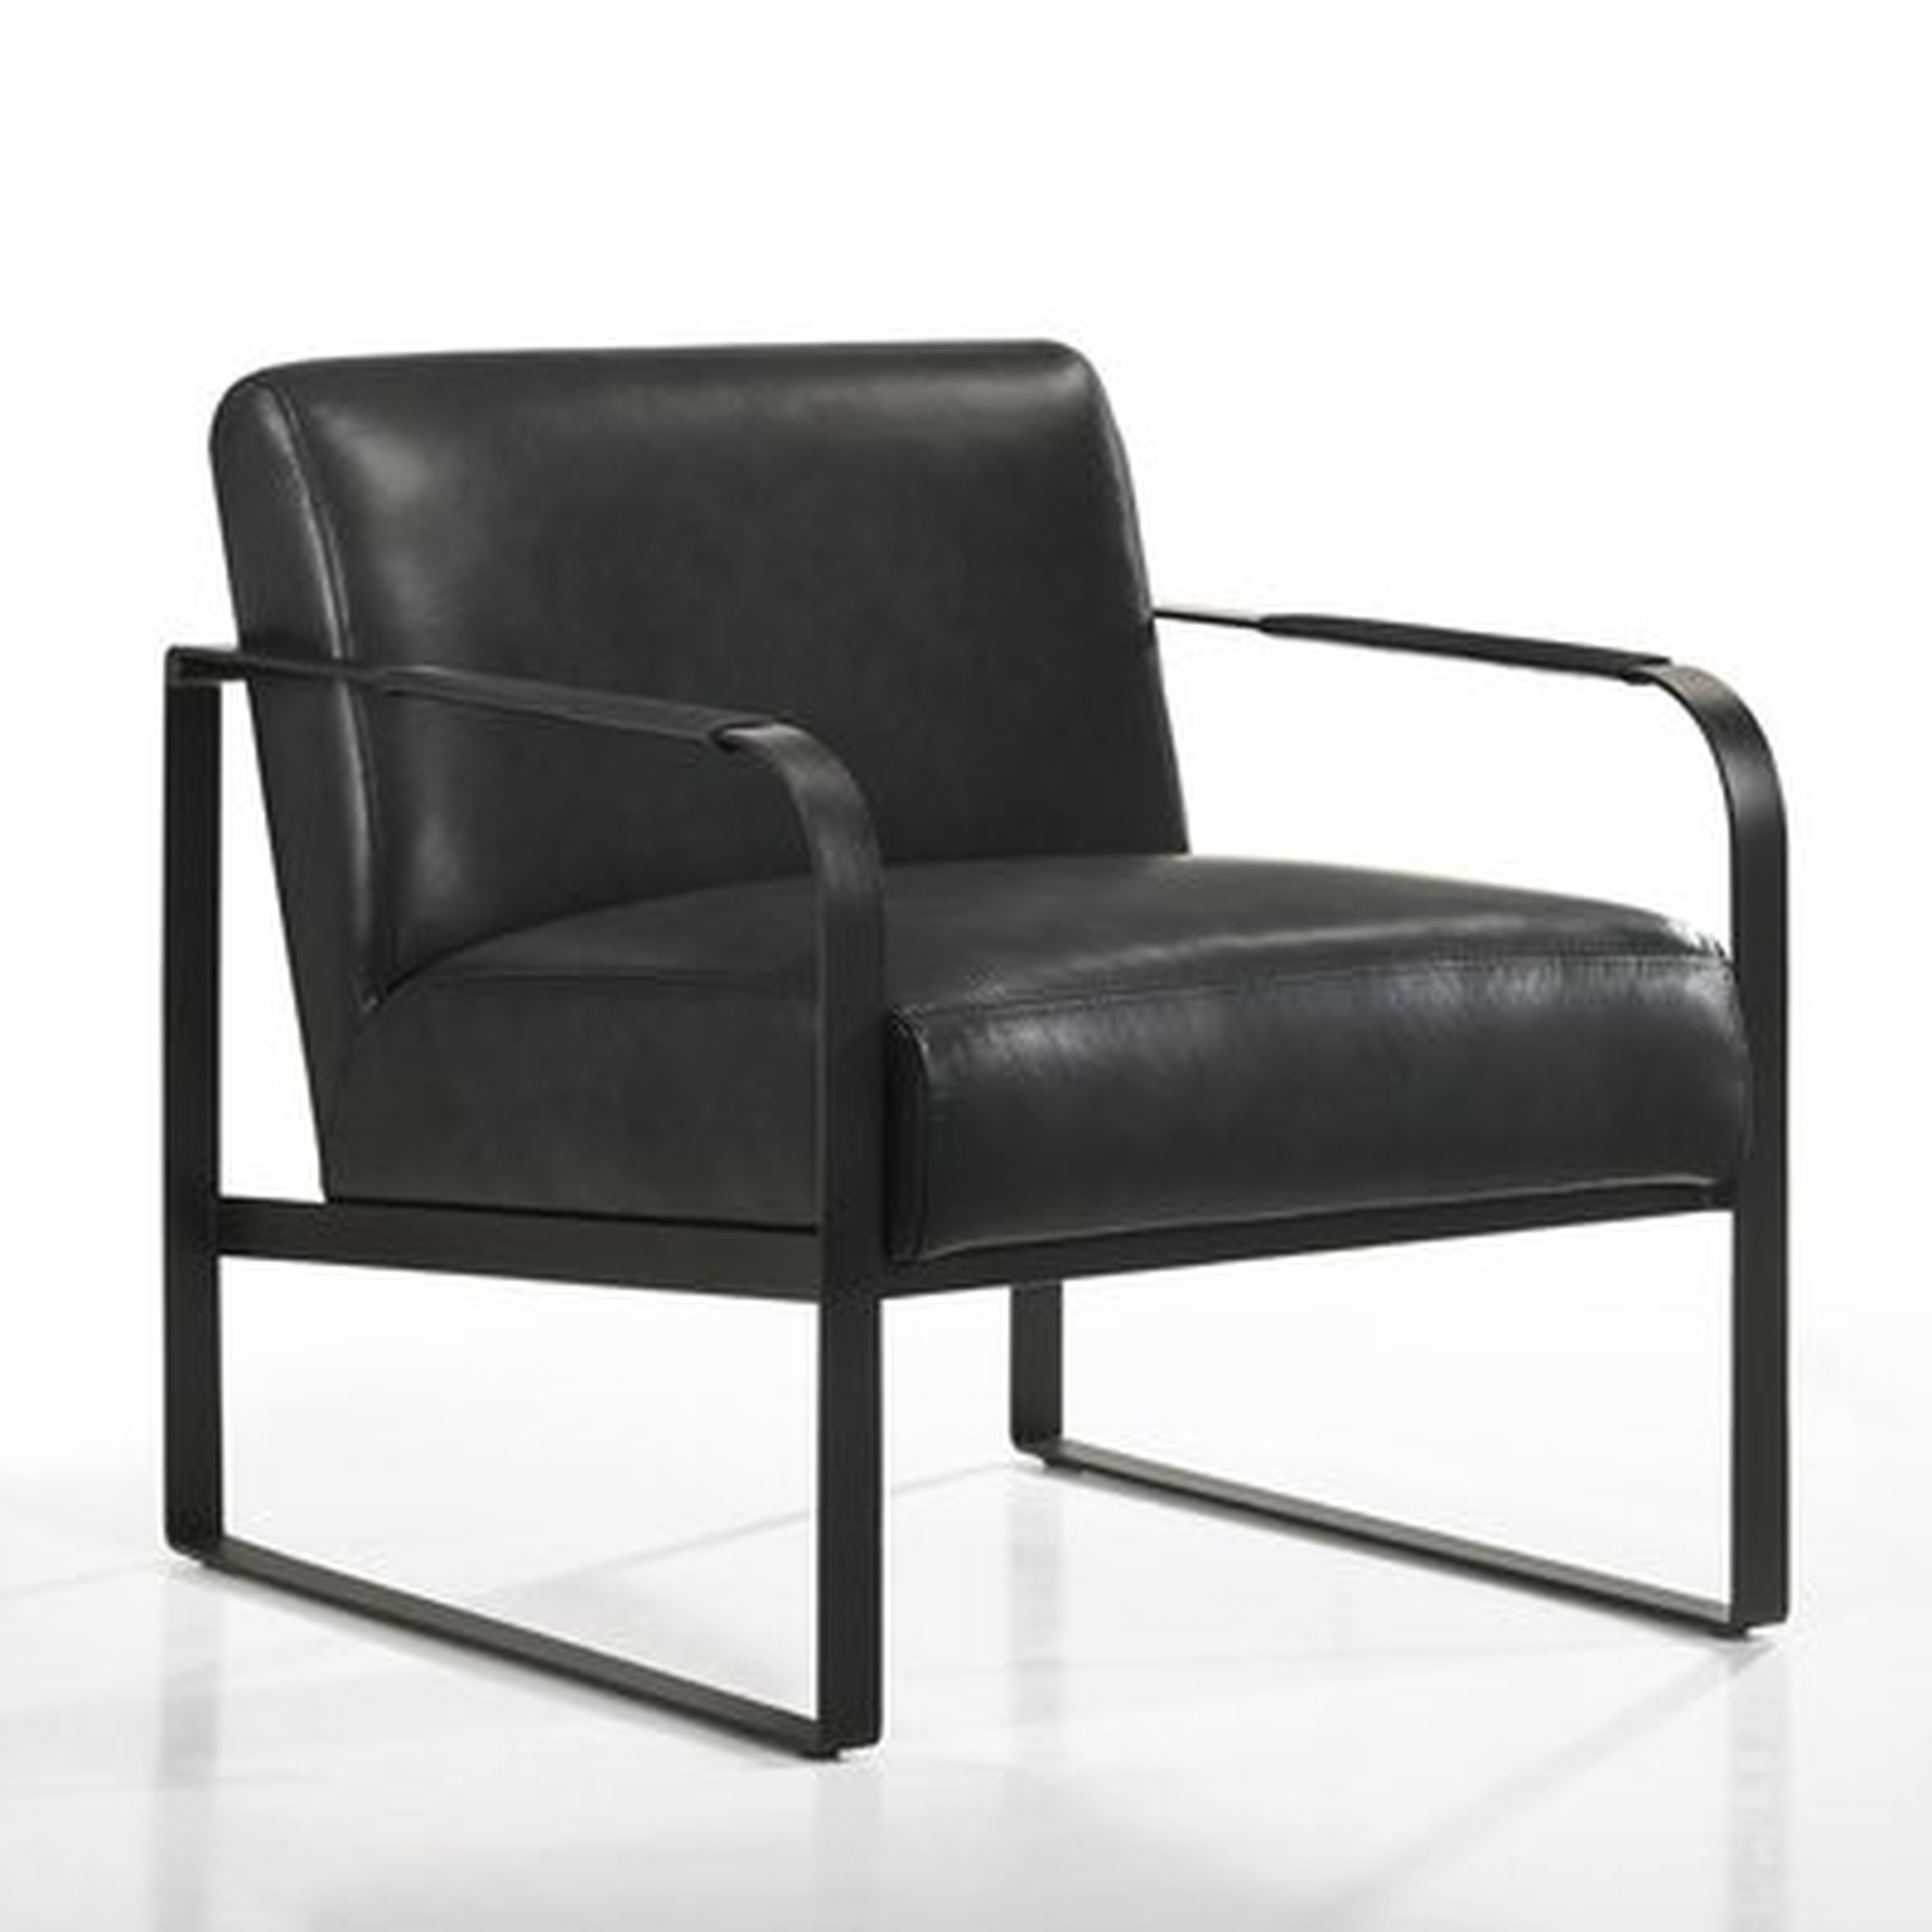 Mason Lounge Accent Chair in , Black Genuine Leather - Wayfair